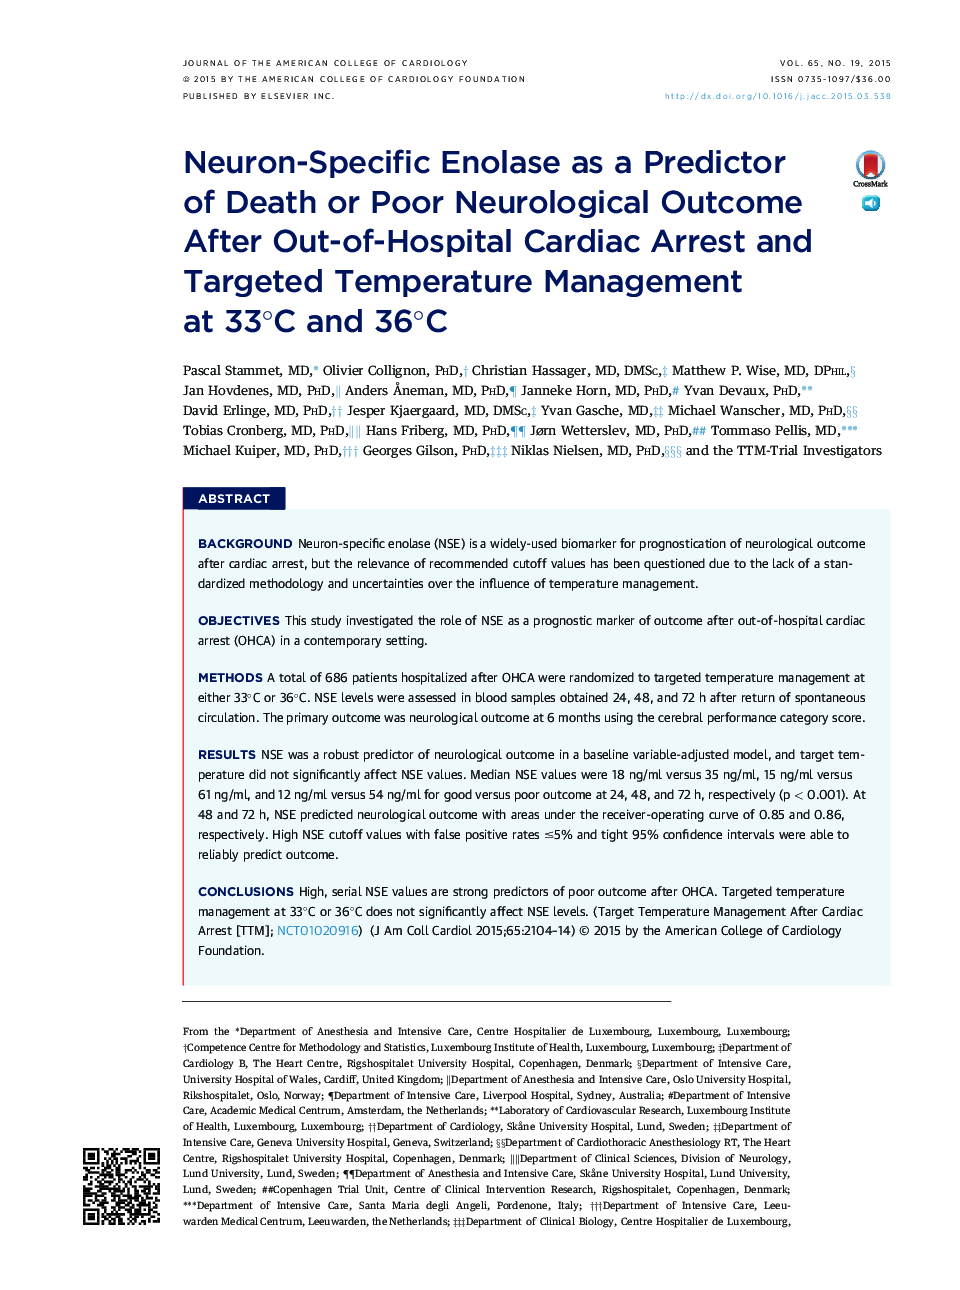 Neuron-Specific Enolase as a Predictor of Death or Poor Neurological Outcome After Out-of-Hospital Cardiac Arrest and Targeted Temperature Management at 33°C and 36°C 